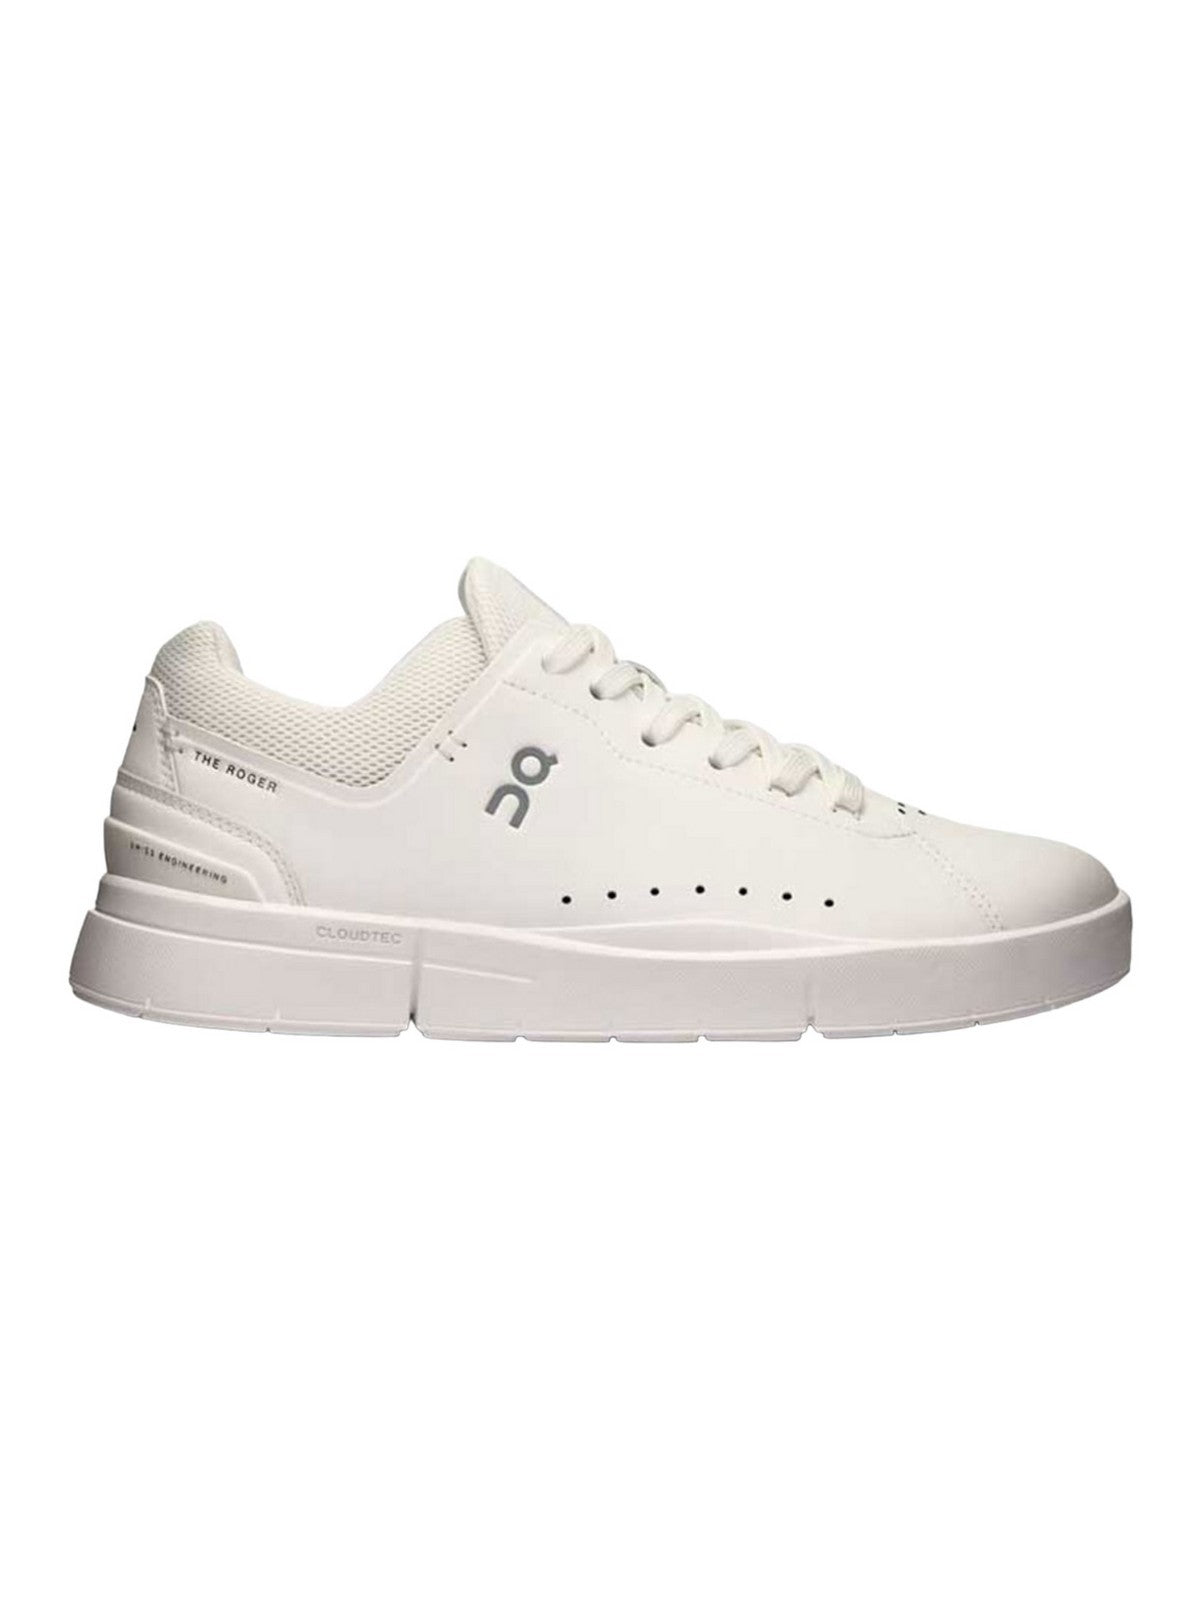 ON Hommes Sneaker The Roger Advantage 3MD10642351 Blanc